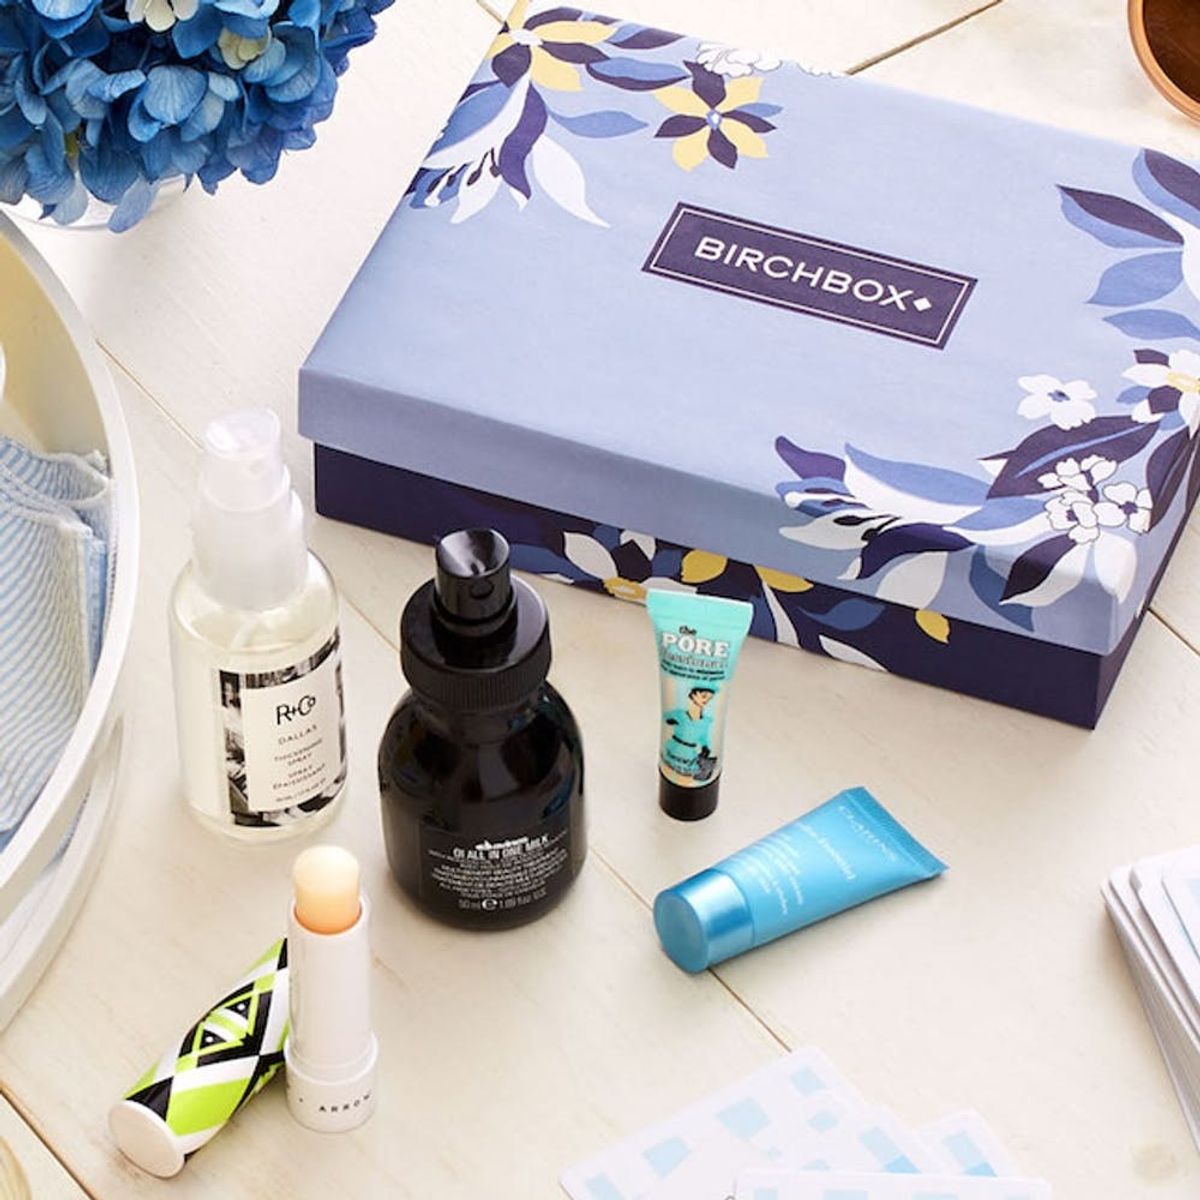 Reese Witherspoon Curated a Birchbox With All Her Favorite Beauty Products